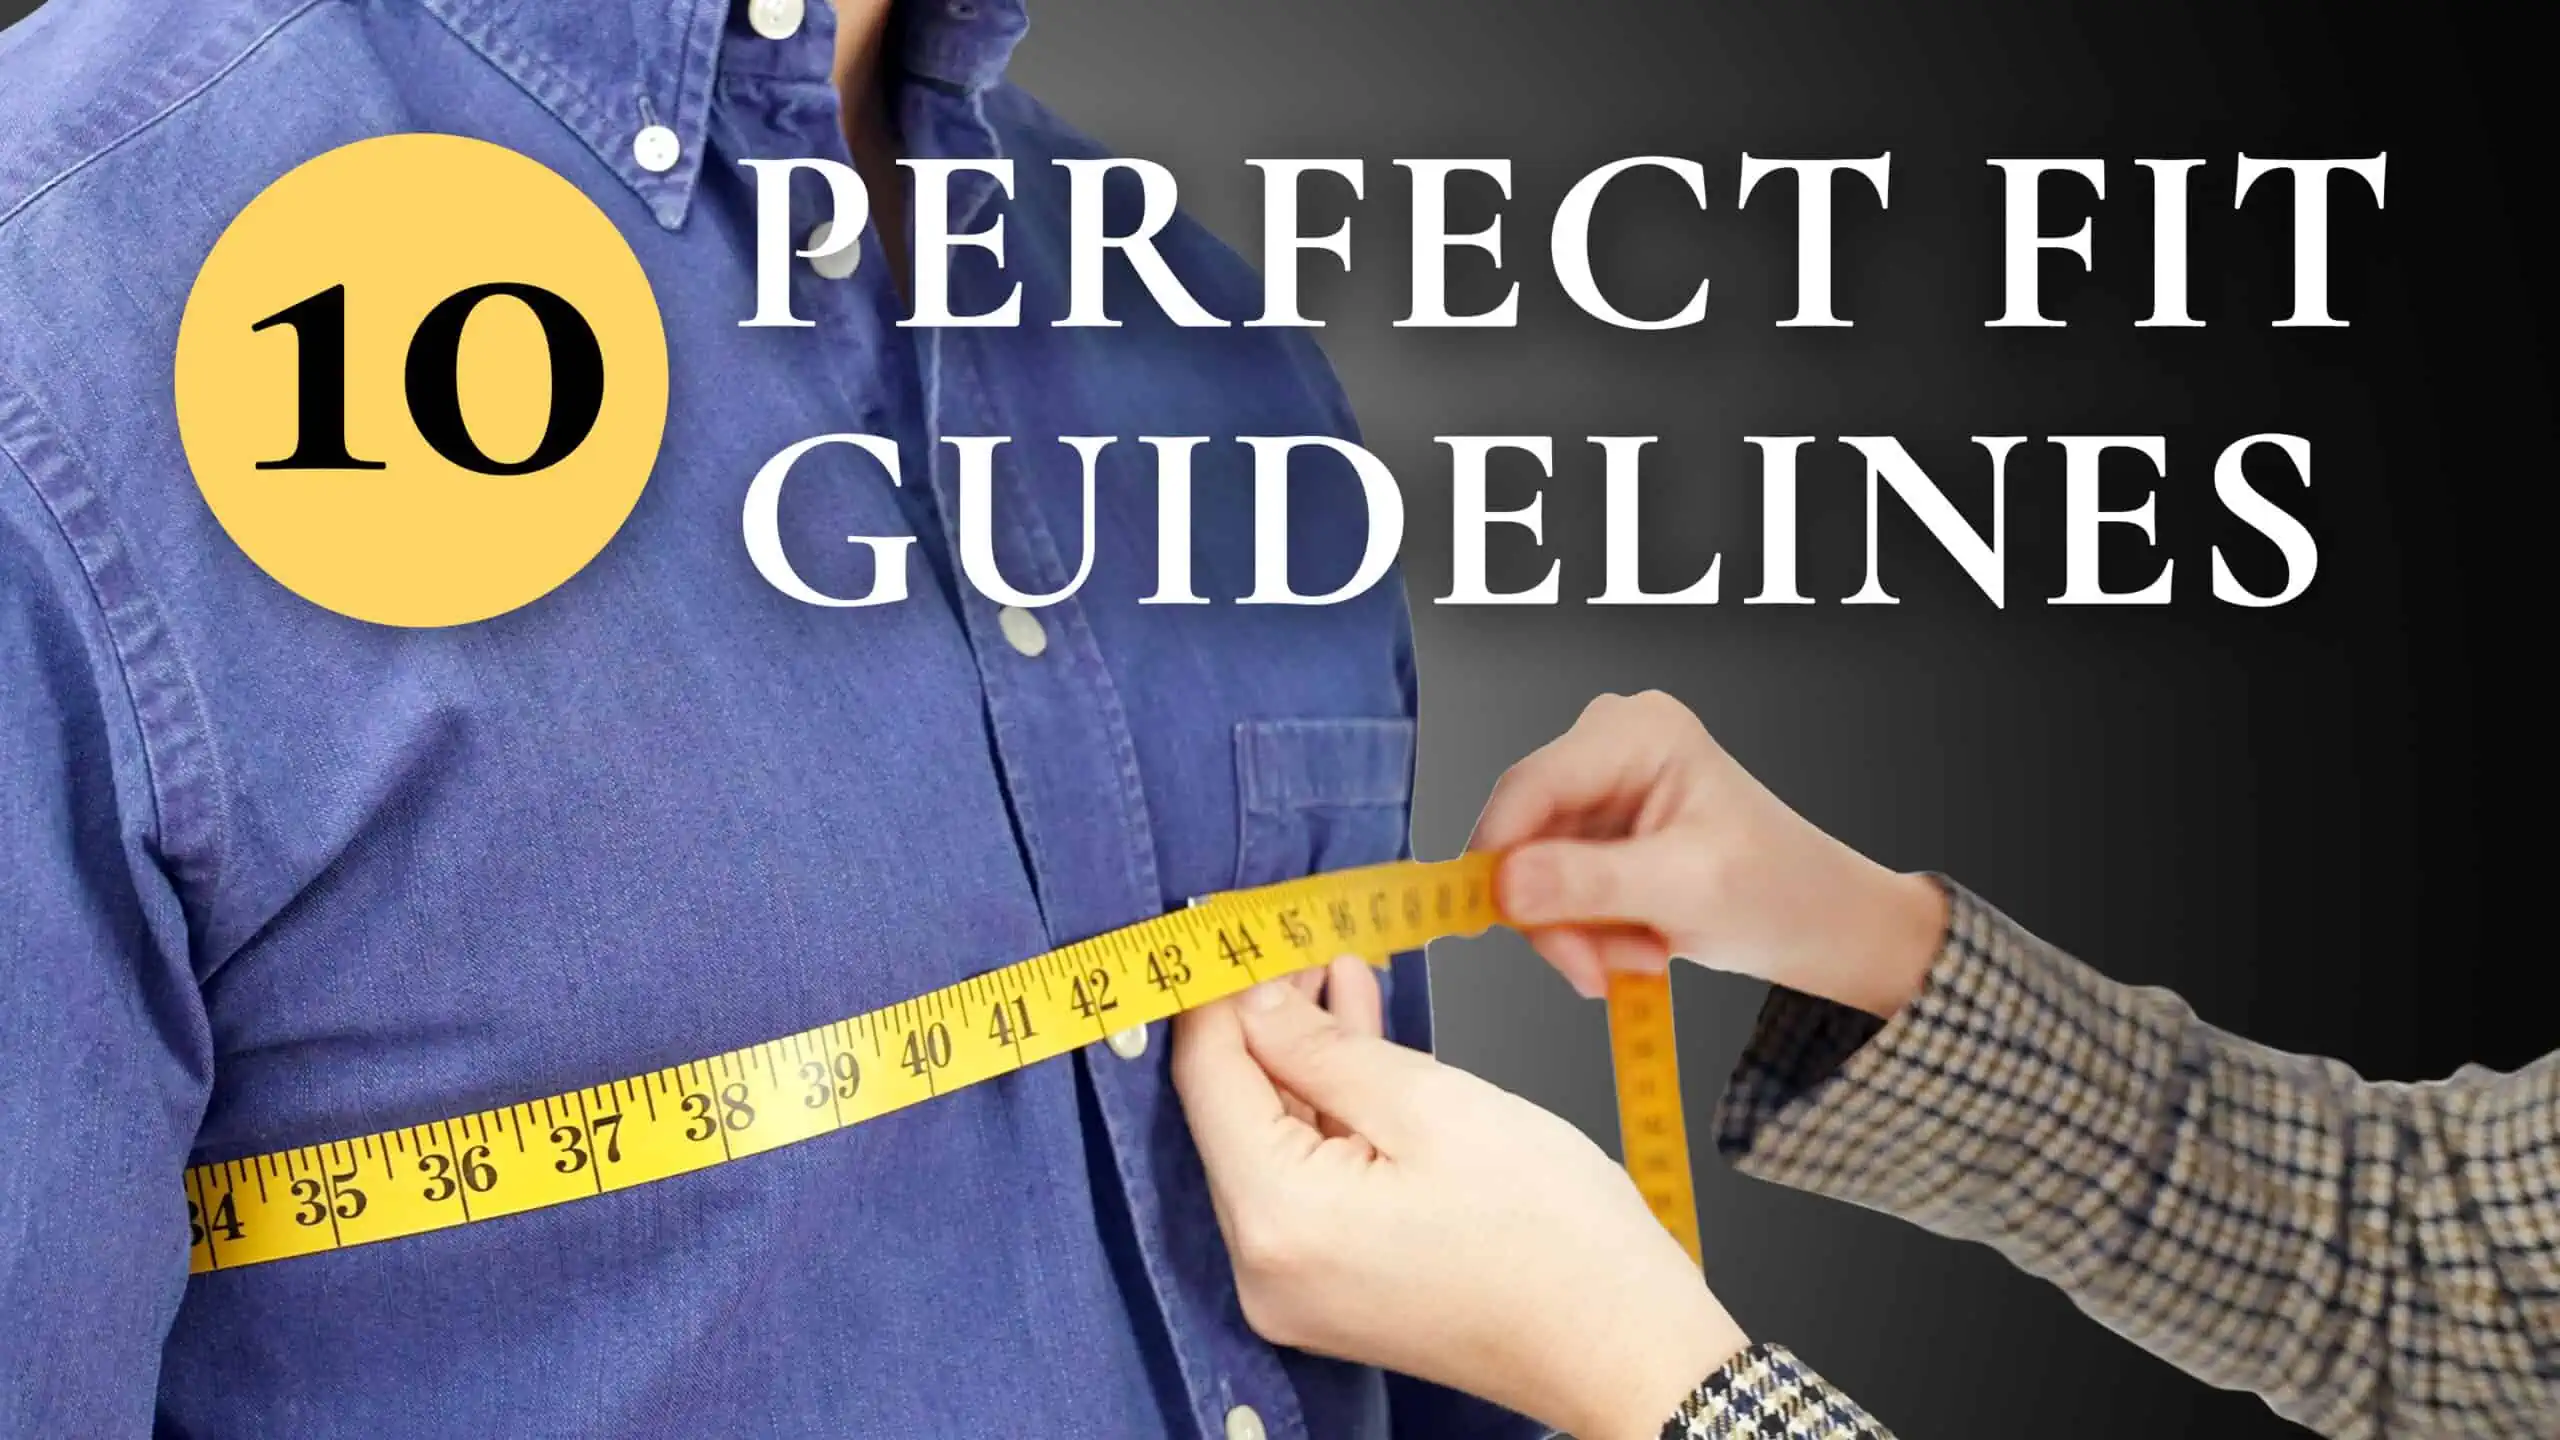 Want Clothes With Perfect Fit? Follow These 10 Guidelines